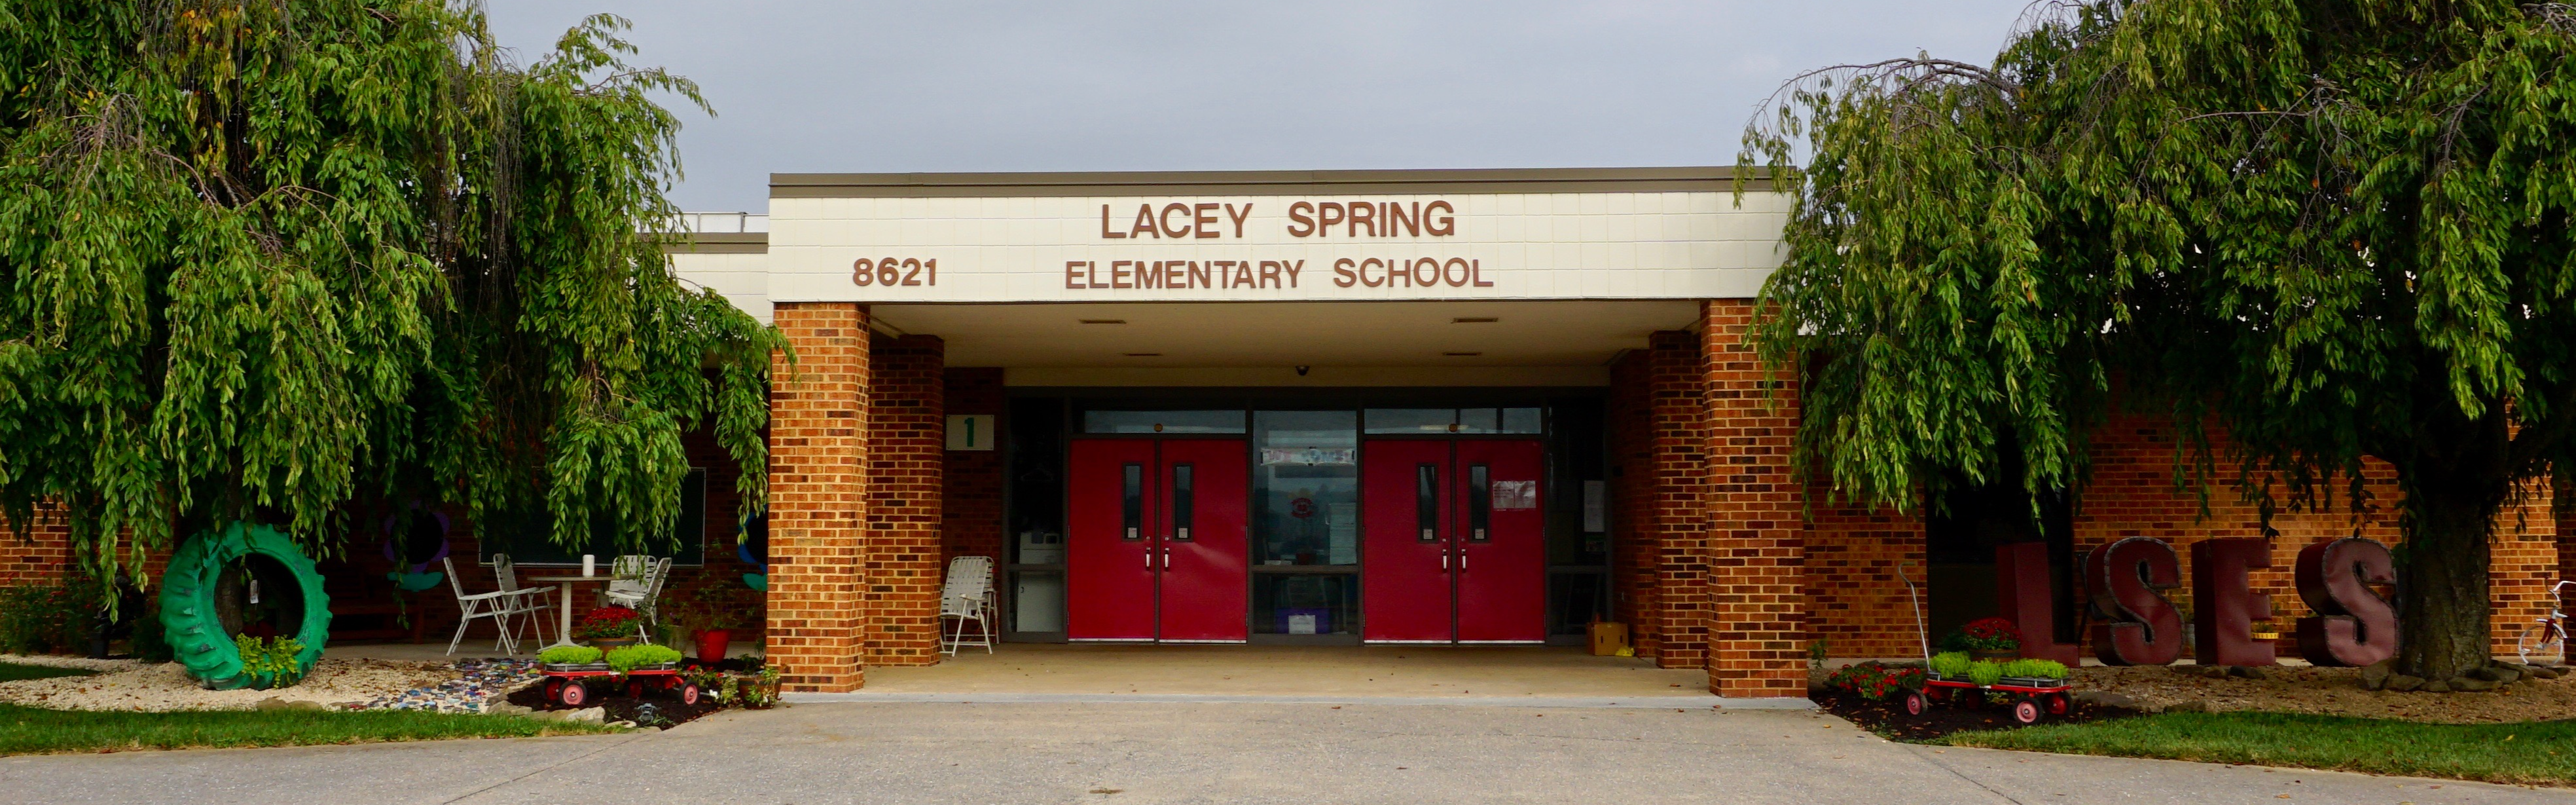 Lacey school